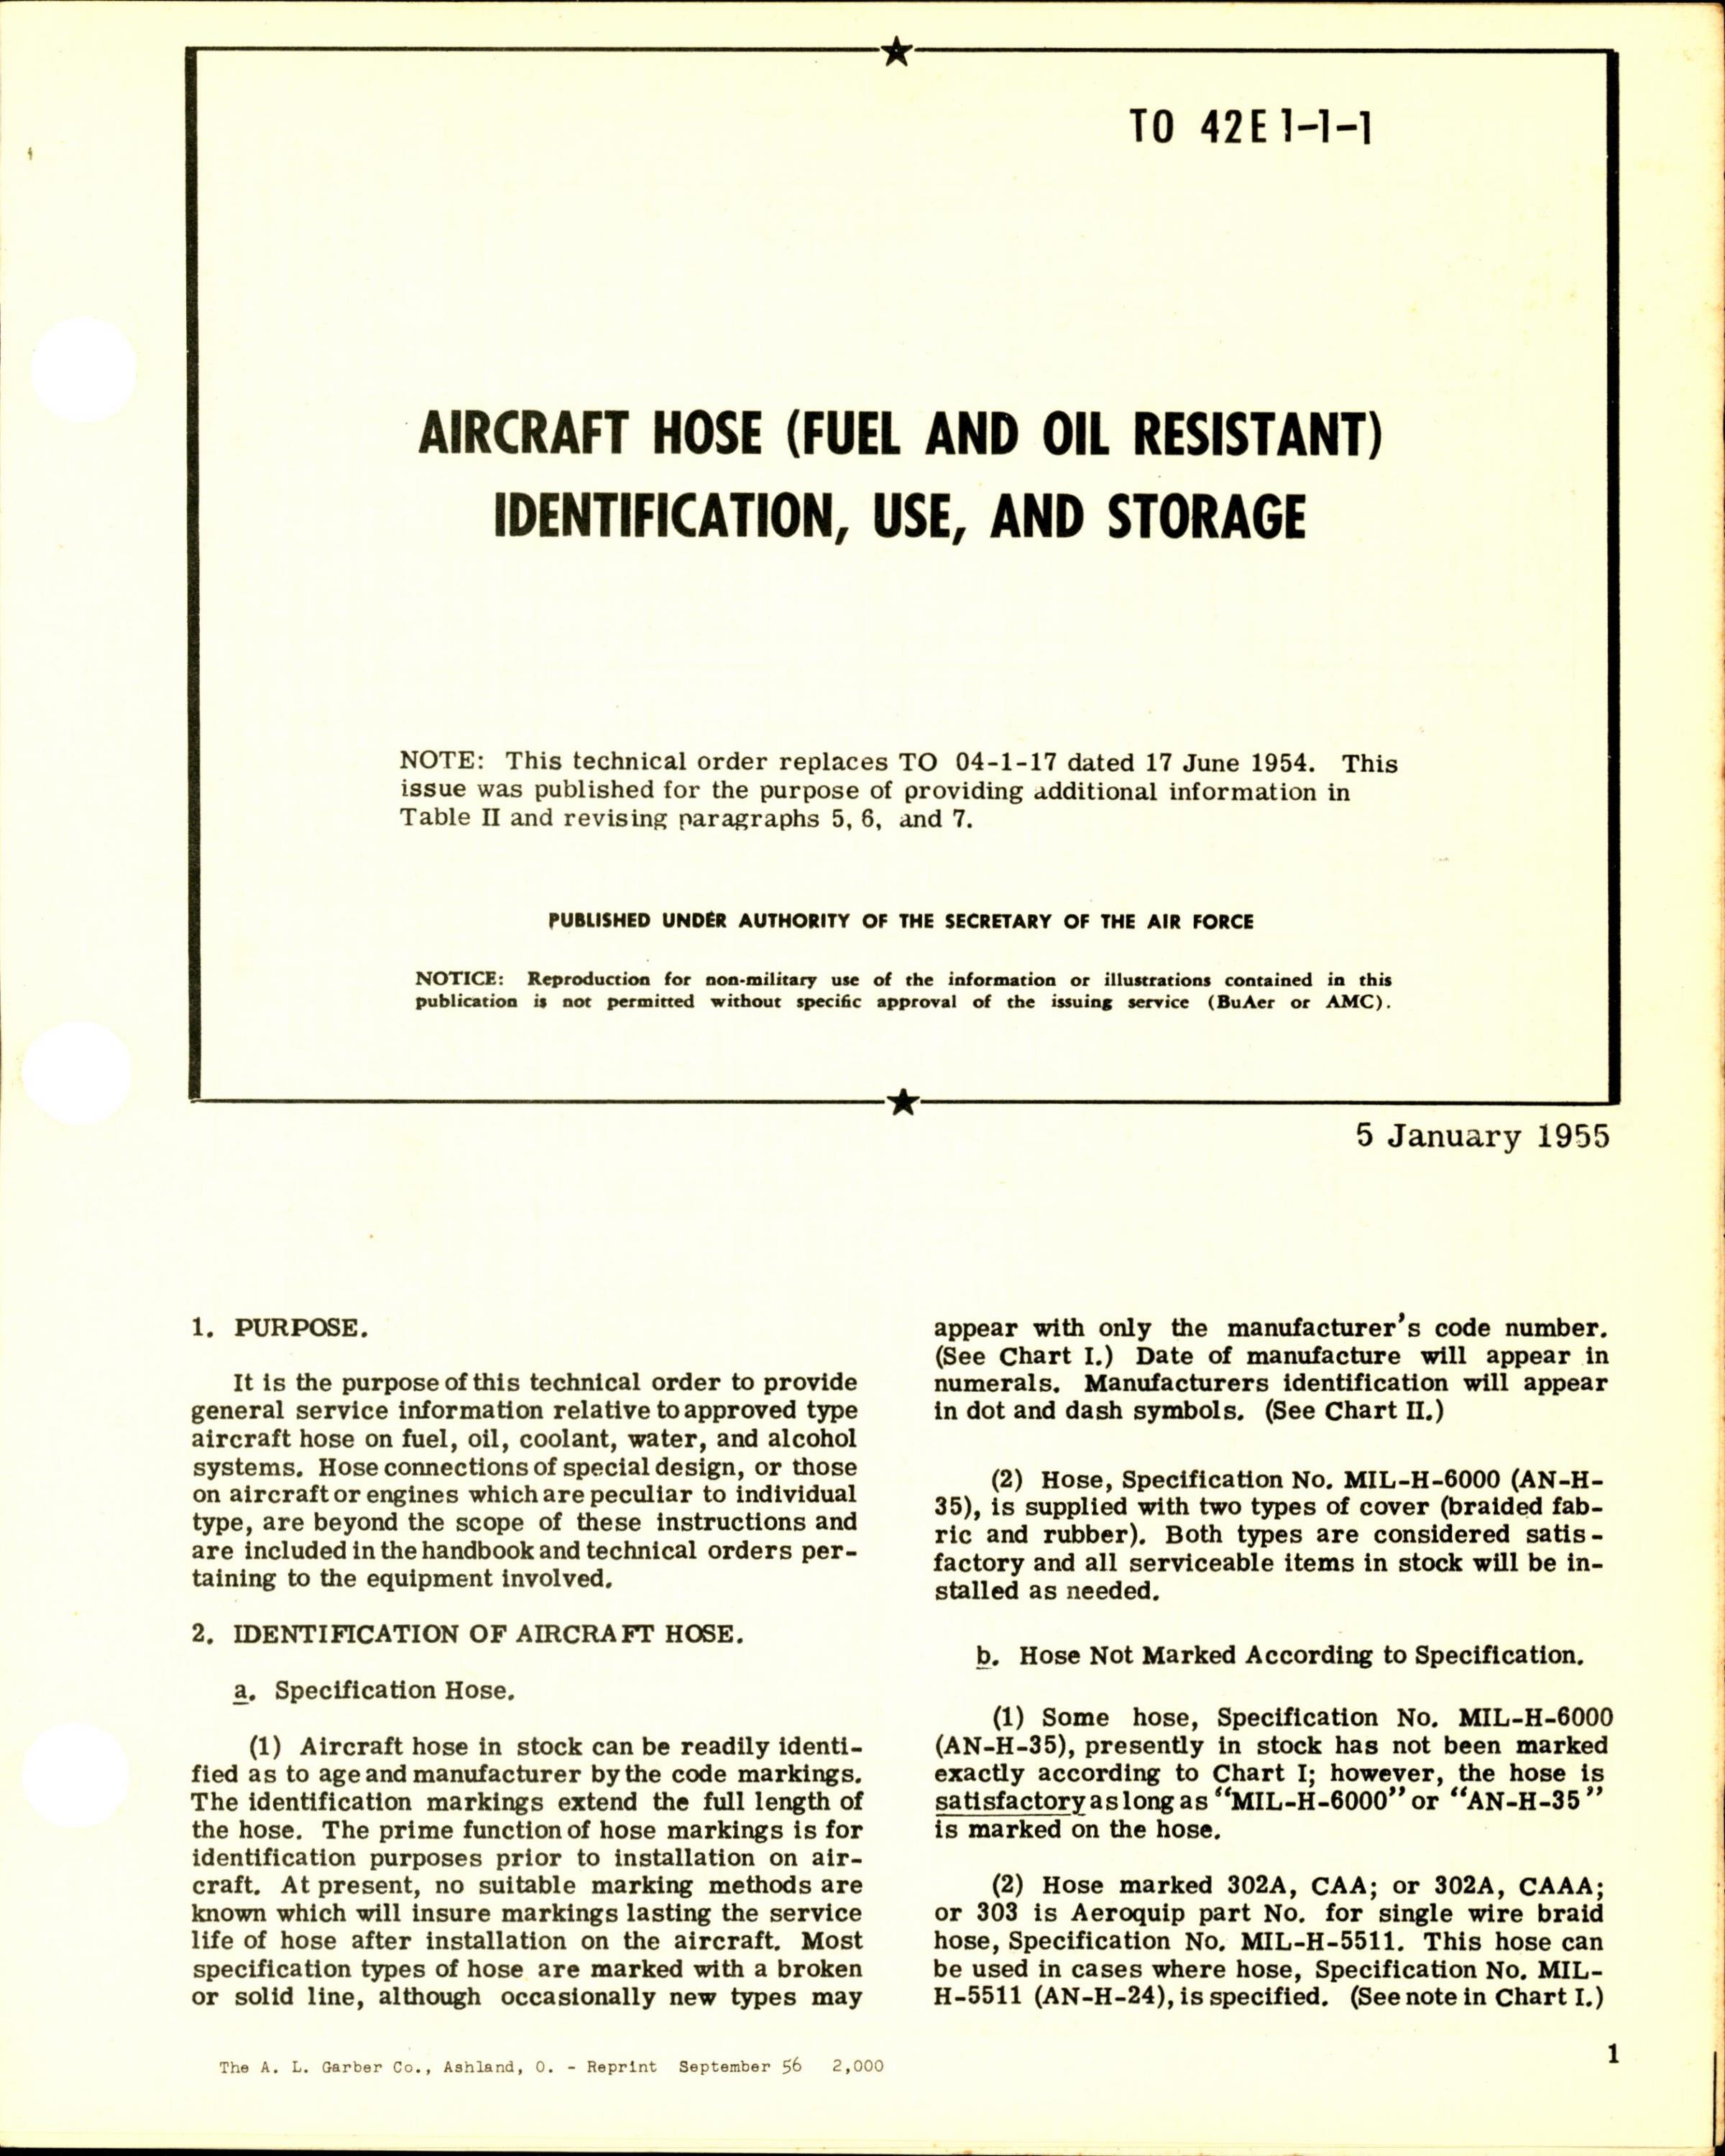 Sample page 1 from AirCorps Library document: Aircraft Hose (Fuel and Oil Resistant) Identification, Use & Storage